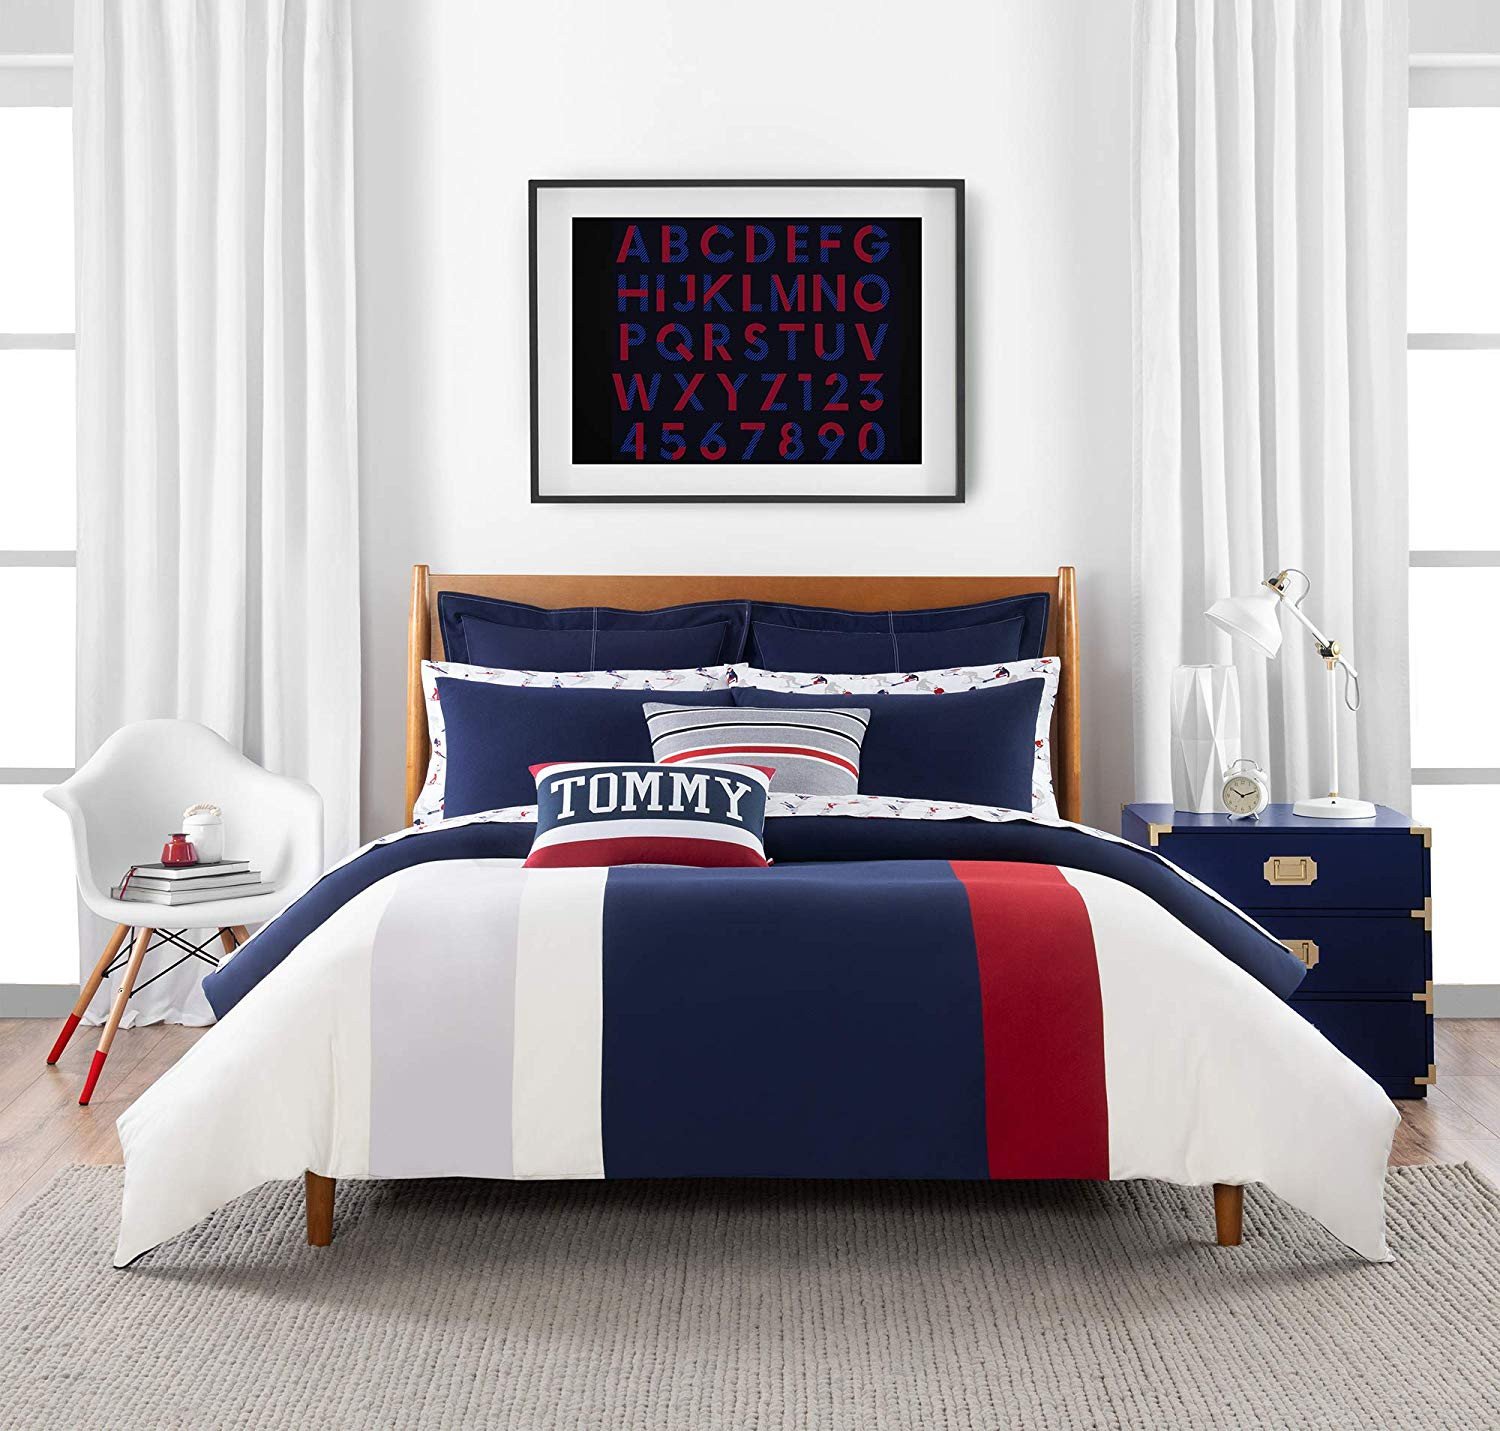 What Size Tv for Bedroom New Amazon tommy Hilfiger Clash Of 85 Stripe Bedding